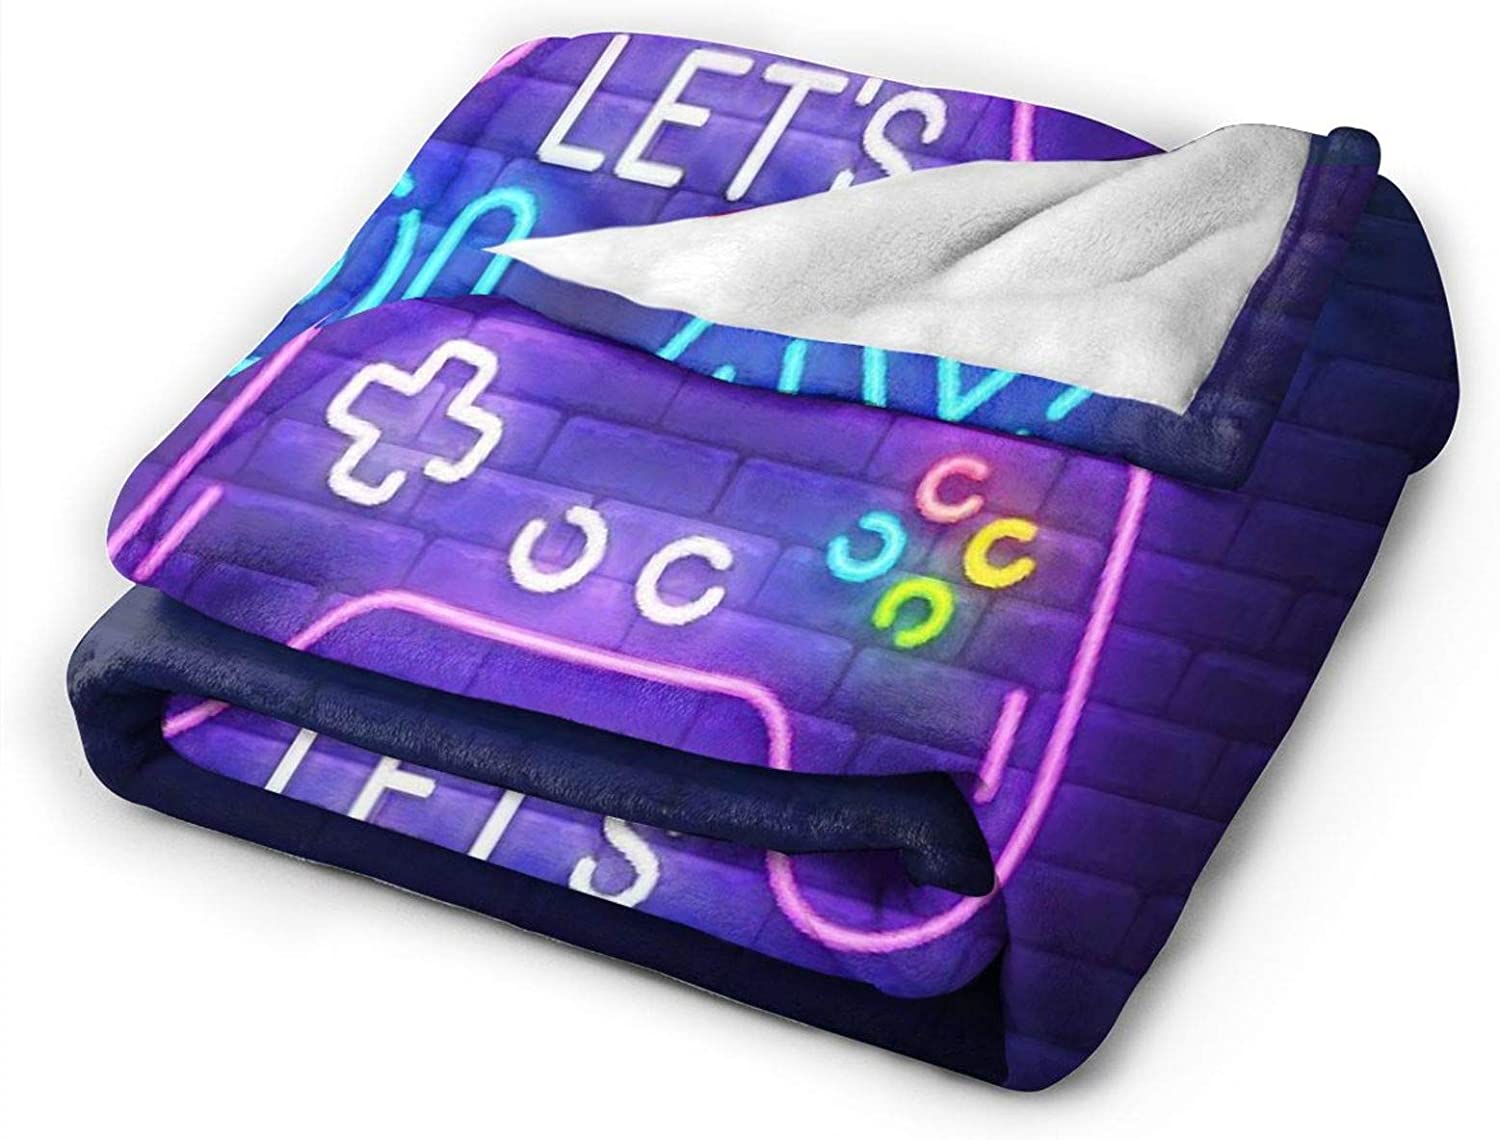 Flannel Fleece Bed Blankets Lightweight Cozy Throw Blanket for Couch Sofa Bedroom Adults Kids,Gamepad Very Cool and Bright Gamepad Theme Featured Image